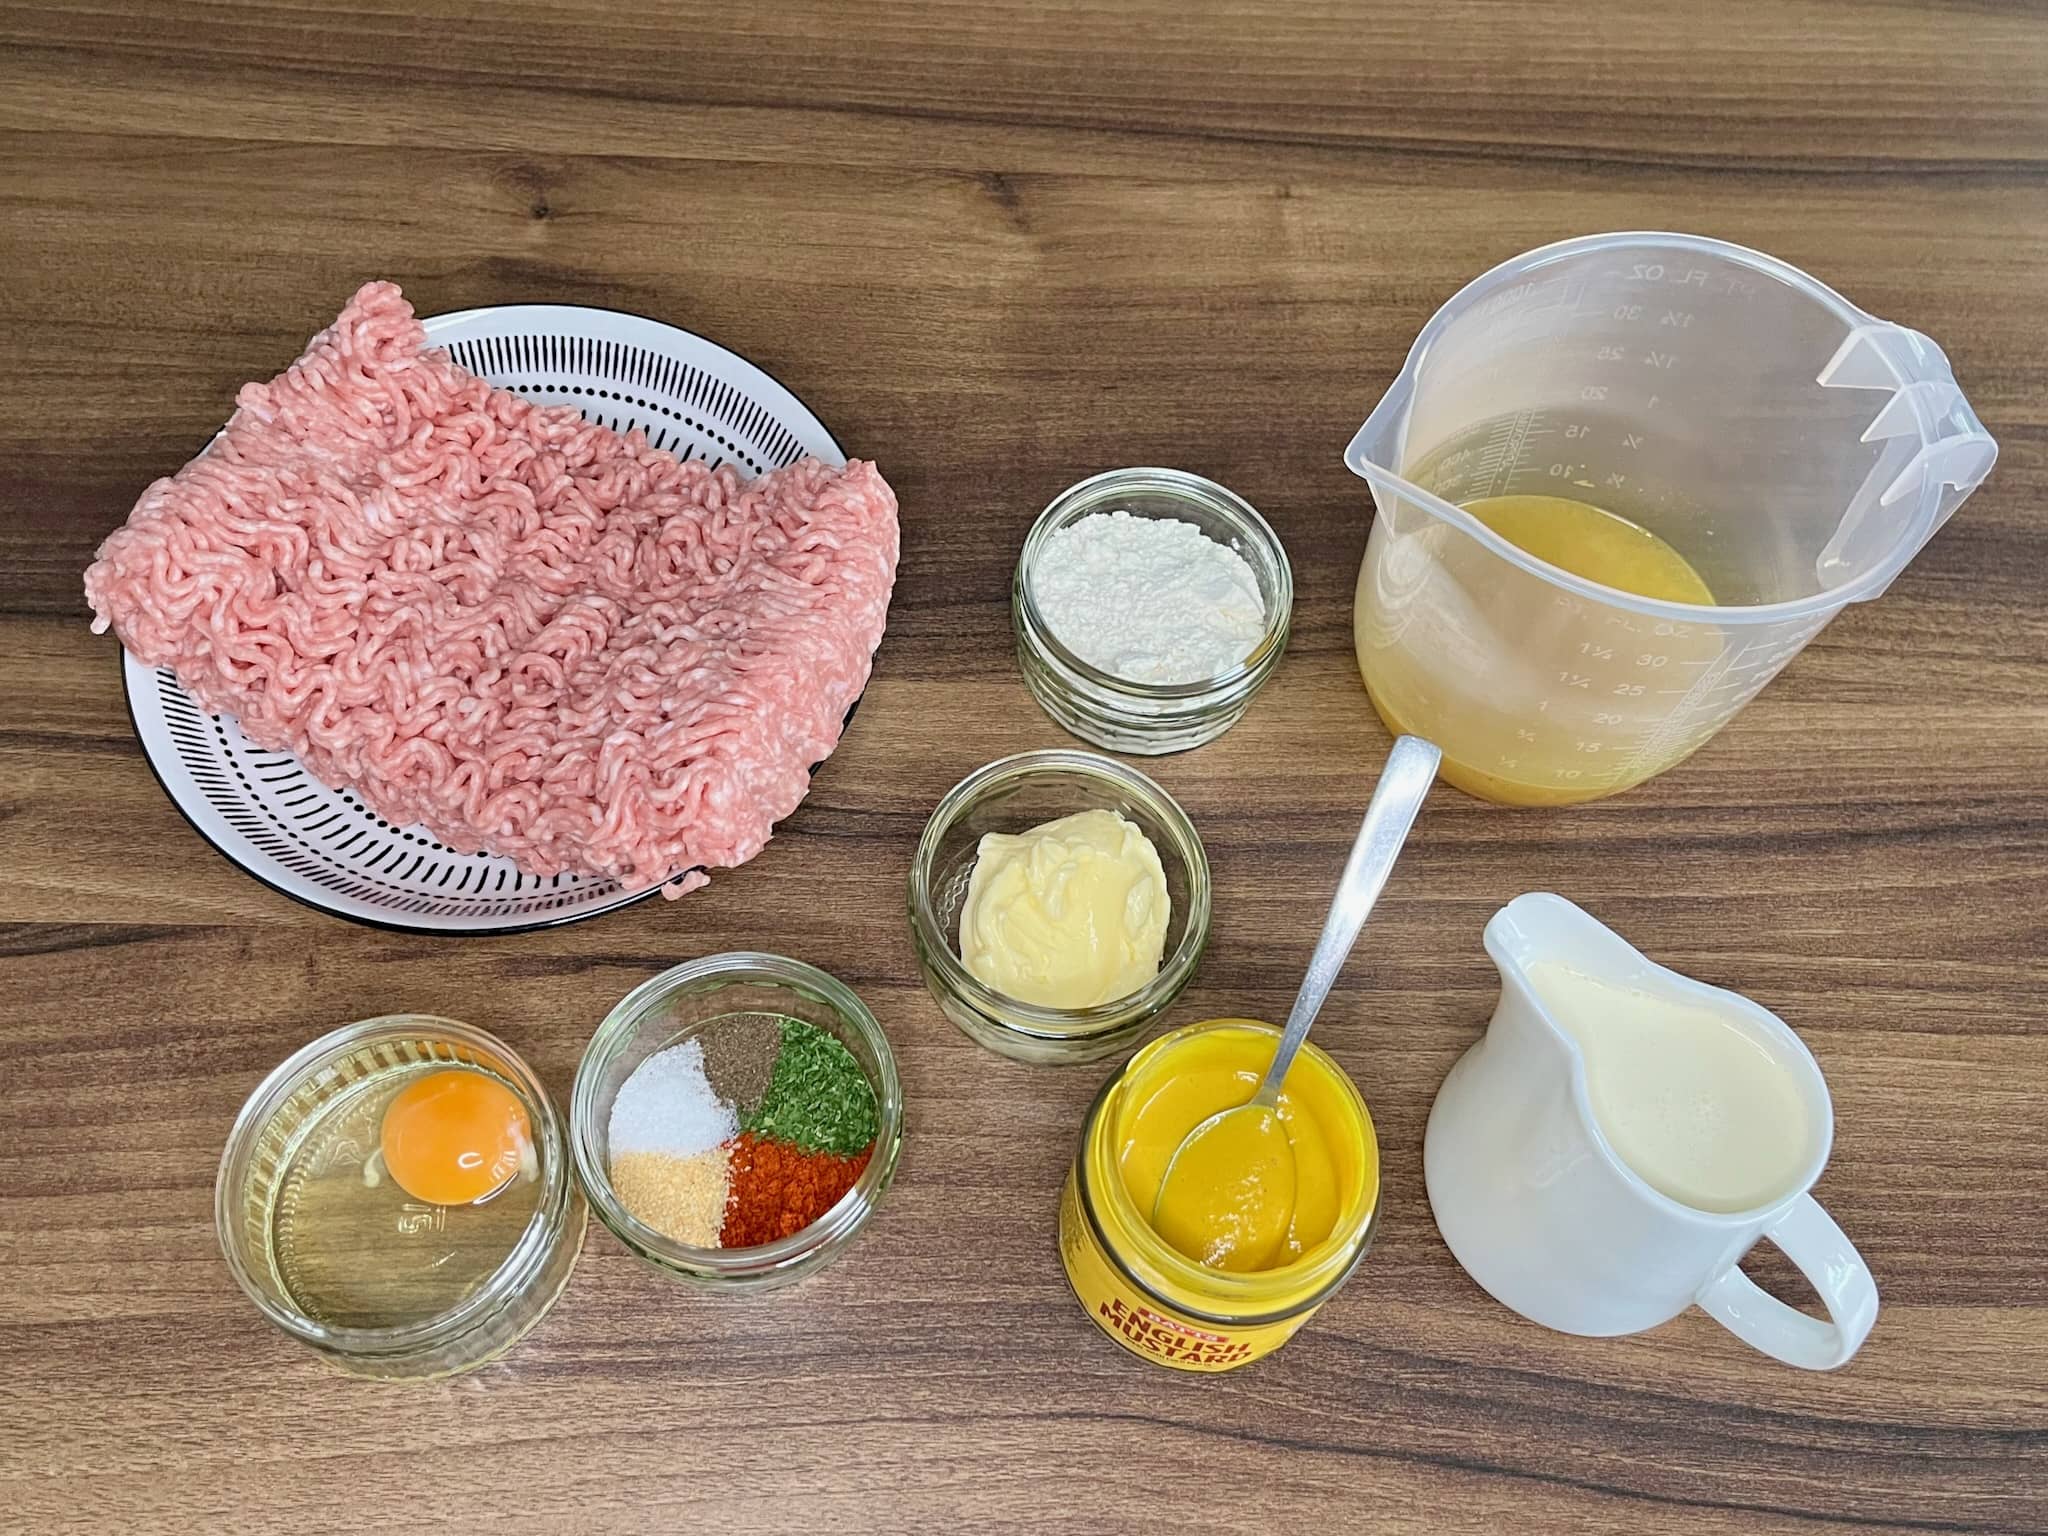 All the ingredients are on the table top, ready to be used to make meatballs in creamy sauce